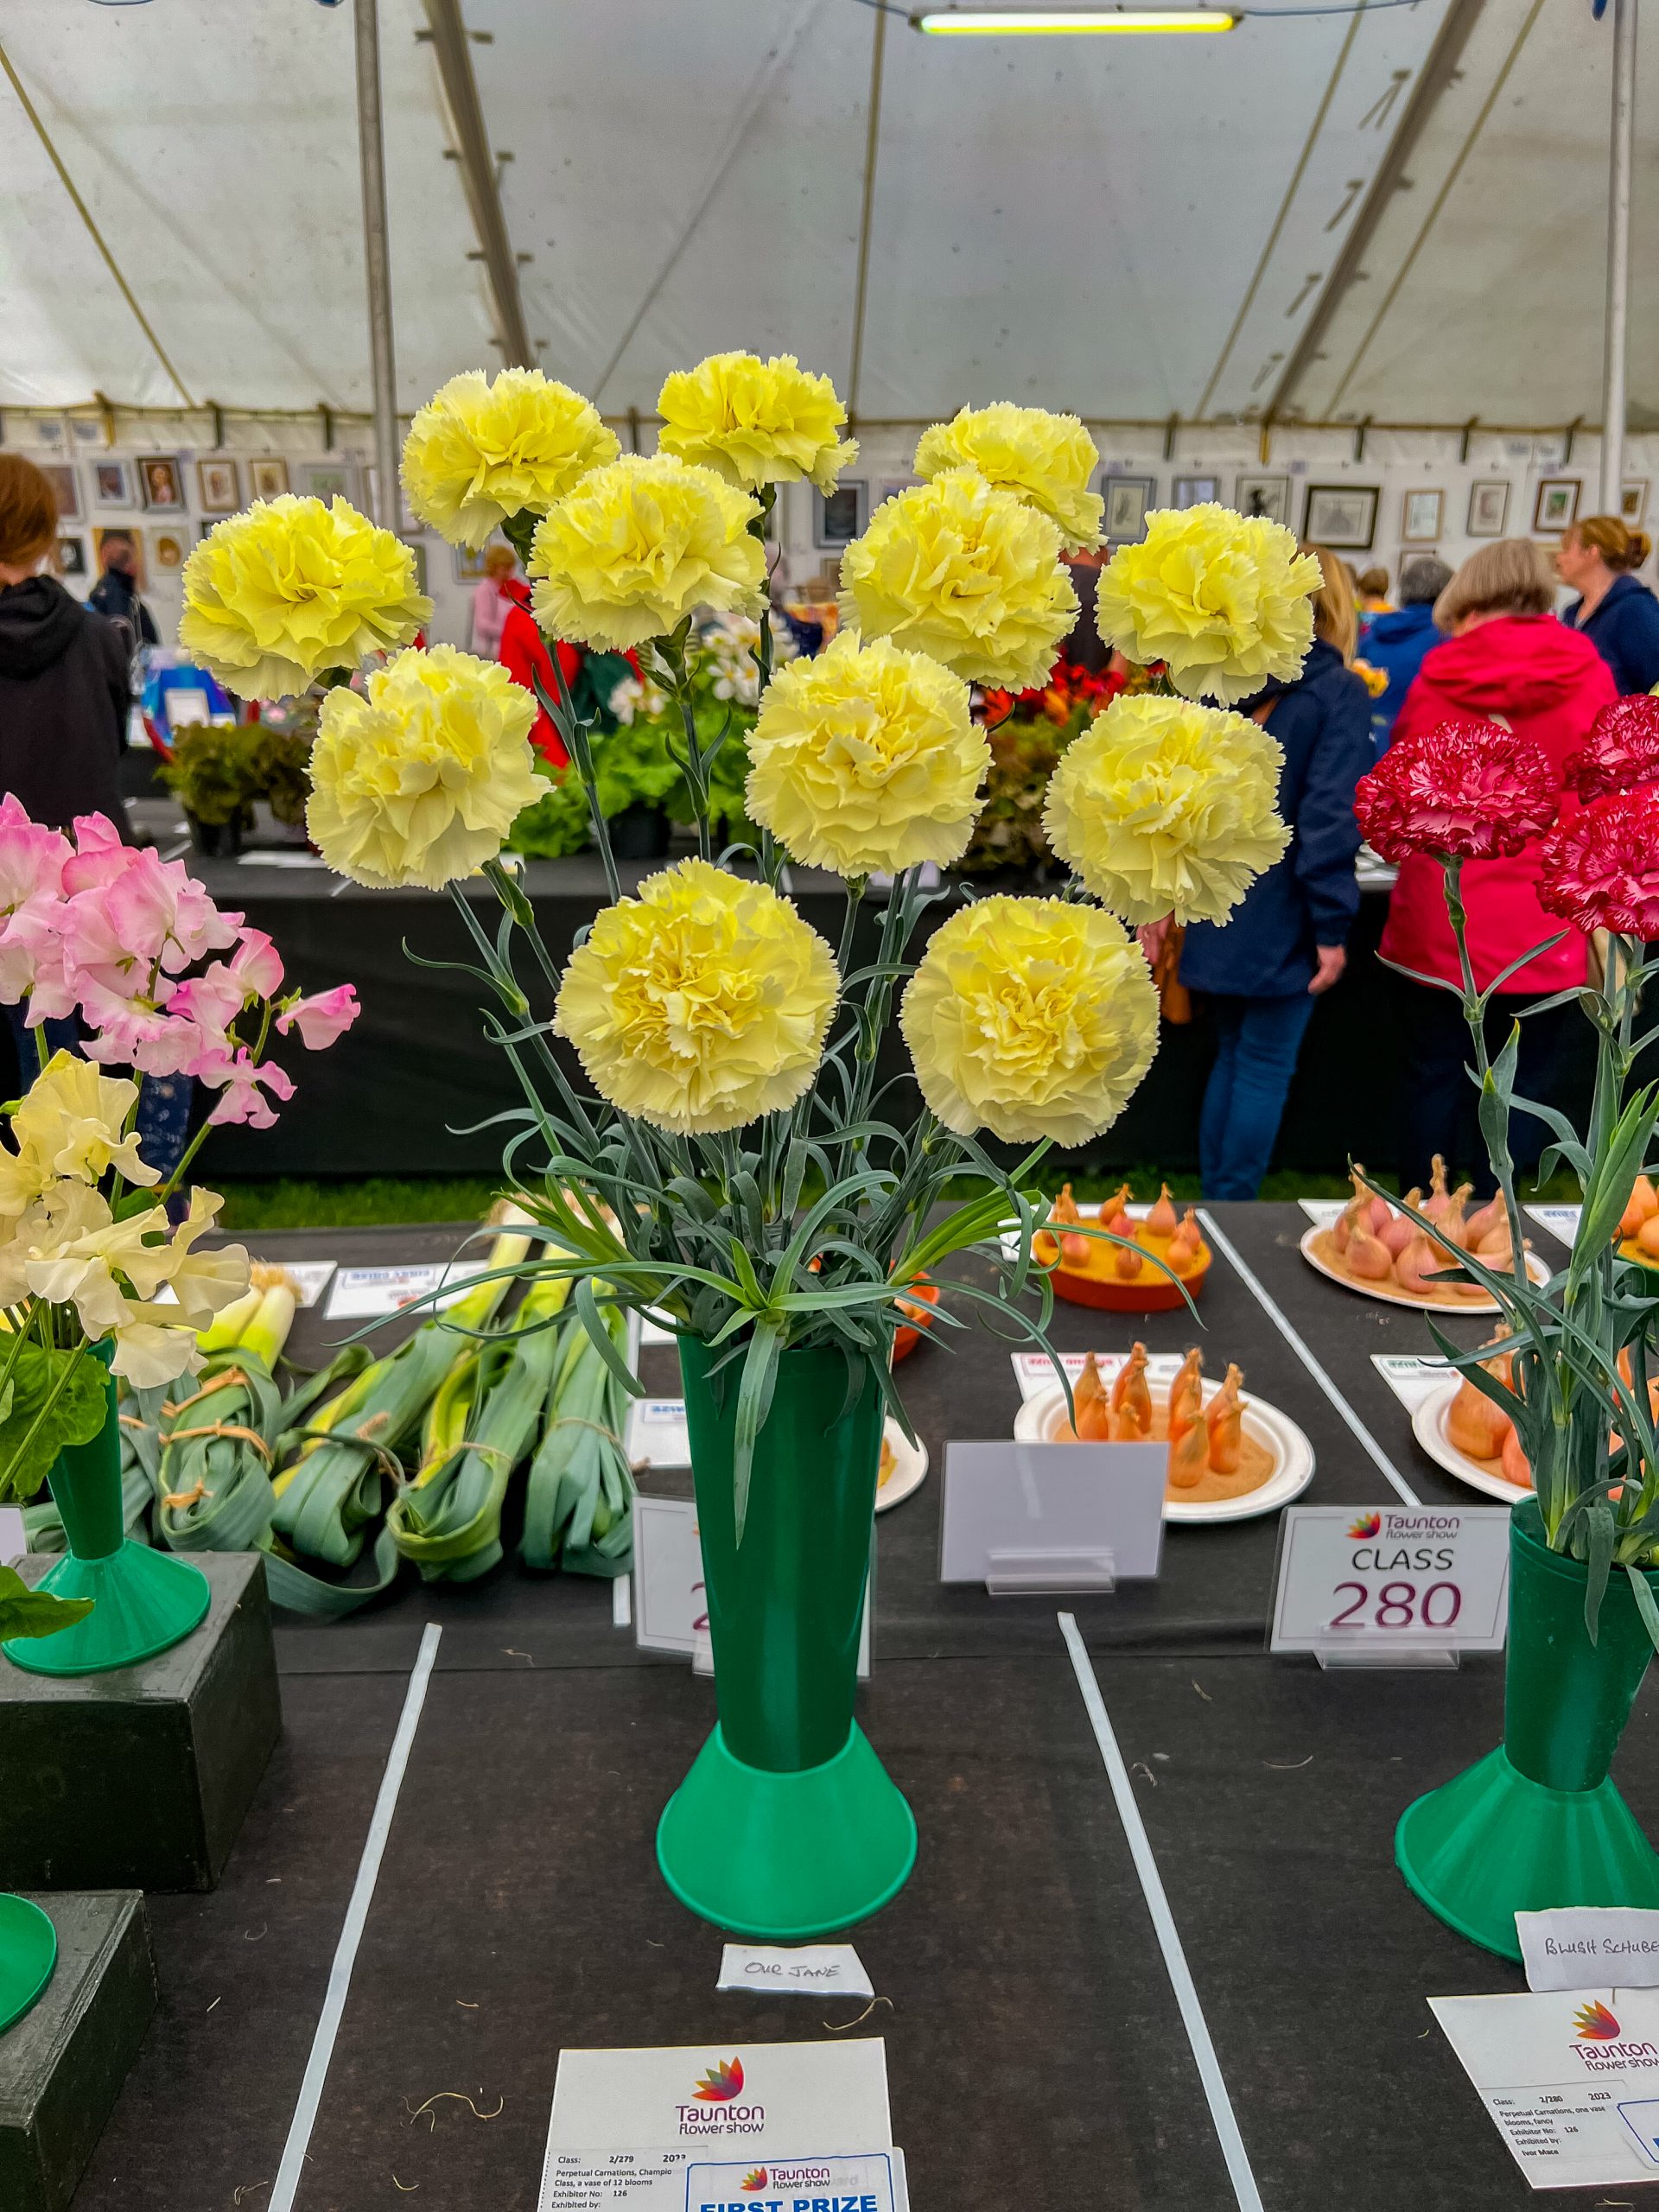 Some yellow perpetual carnations with a first prize card in the Compeittion Marquee